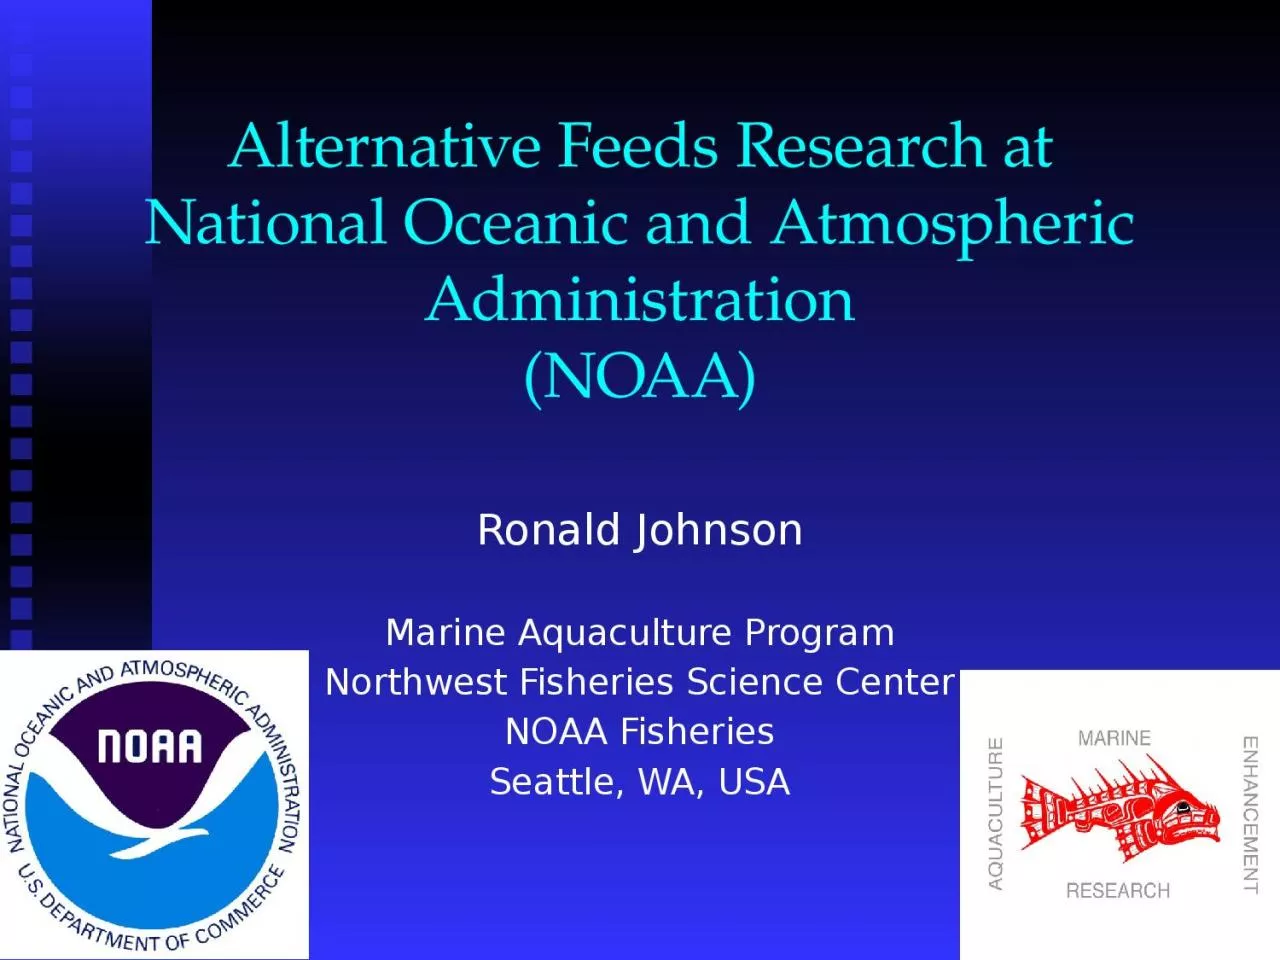 Alternative Feeds Research at National Oceanic and Atmospheric Administration